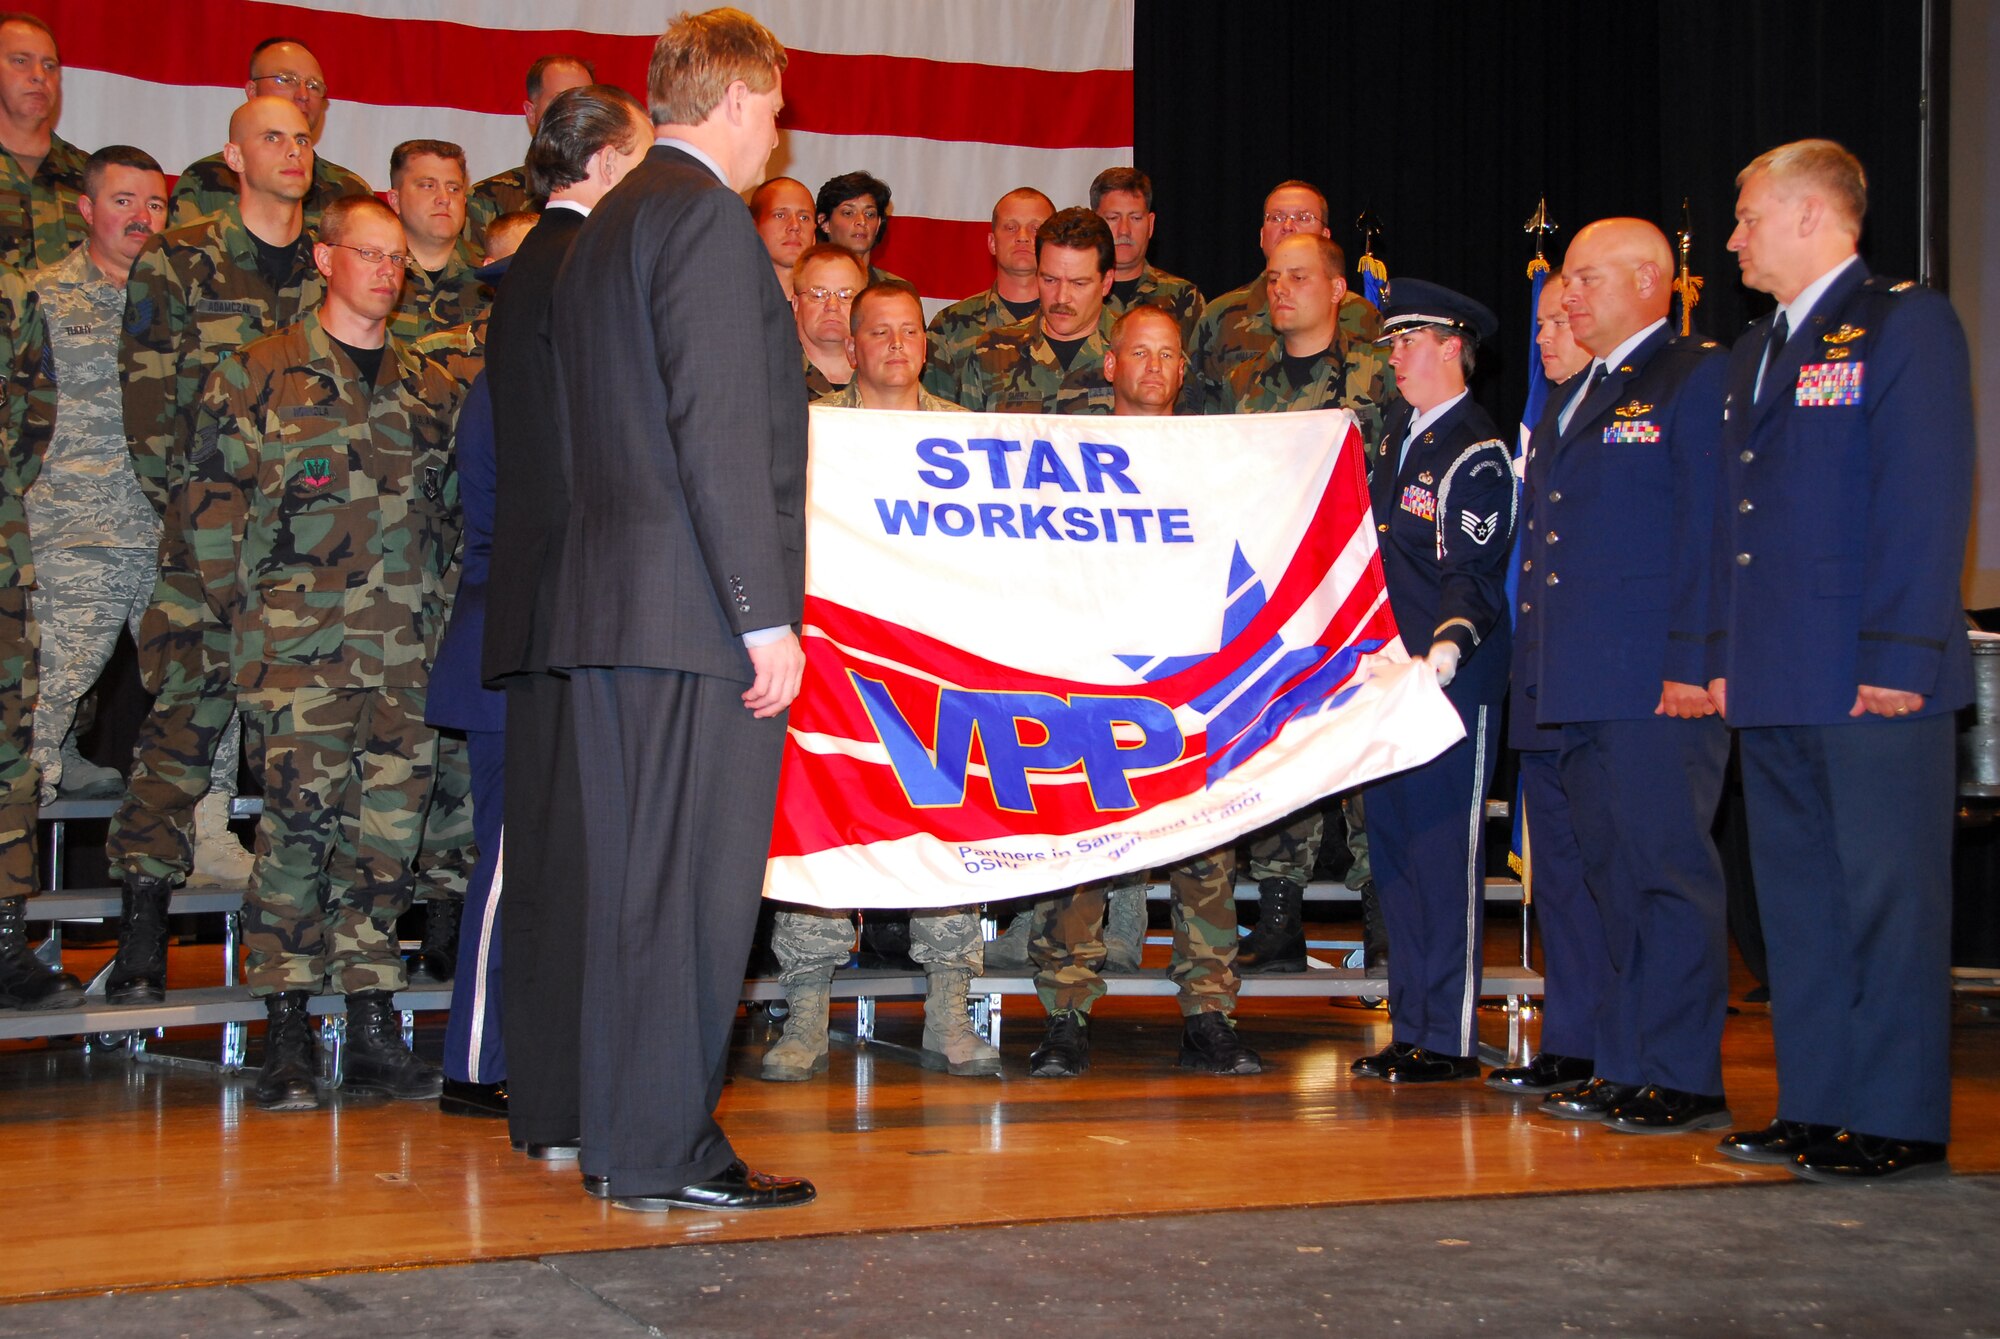 The 148th Fighter Wing, Duluth, Minn. was presented with OSHA's Voluntary Protection Program STAR rating at an awards ceremony in Duluth, Minn. on June 15, 2008.  The award was presented by the Honorable William C. Anderson, Assistant Secretary of the Air Force and the Honorable Edwin G. Foulke, Assistant Secretary of Labor for Occupational Safety and Health.  (U.S. Air Force photo by Tech. Sgt. Brett R. Ewald)  (Released)
